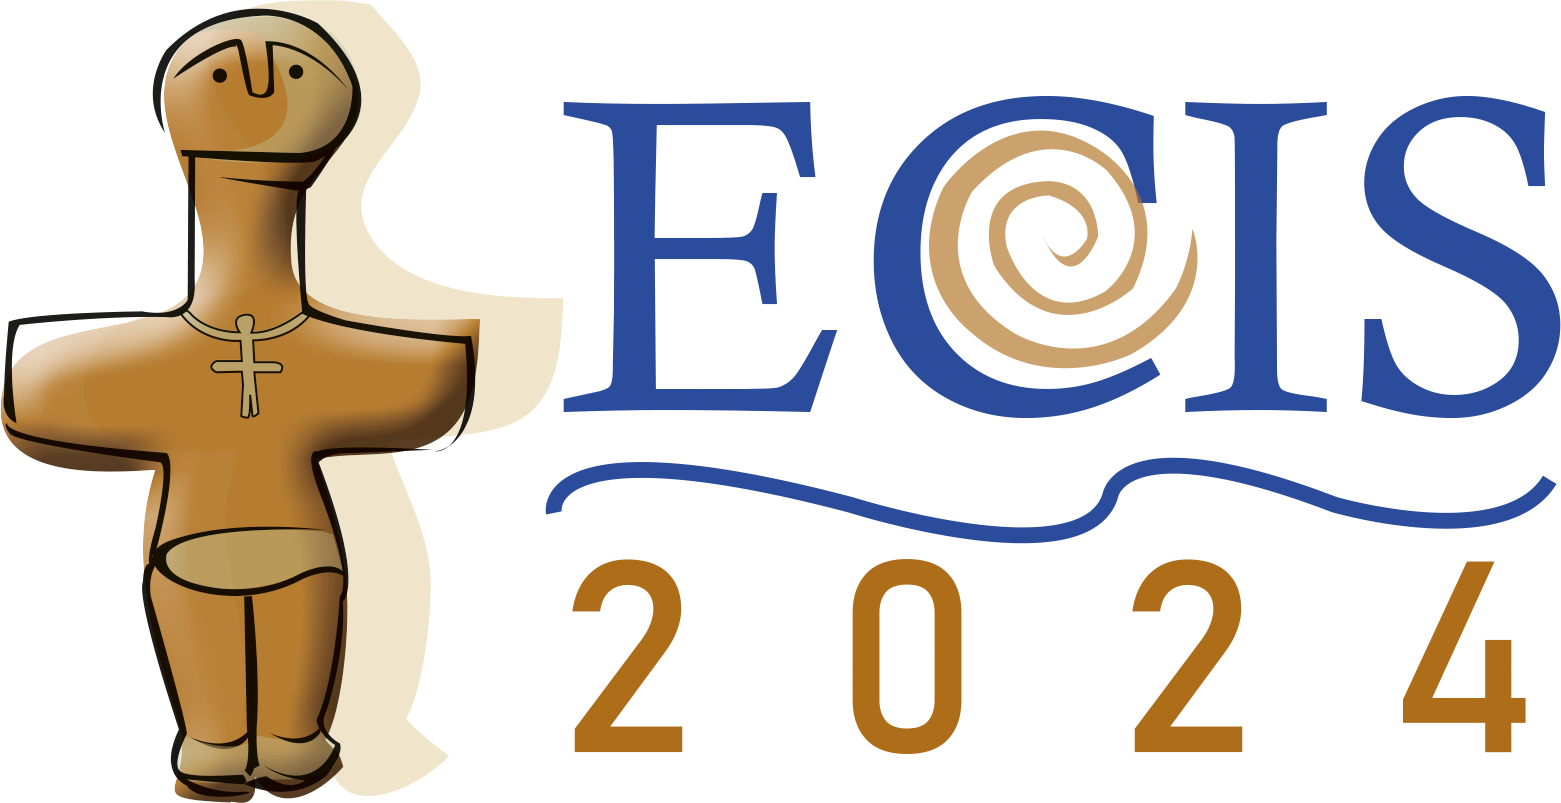 ECIS 2024 (32nd European Conference on Information Systems)